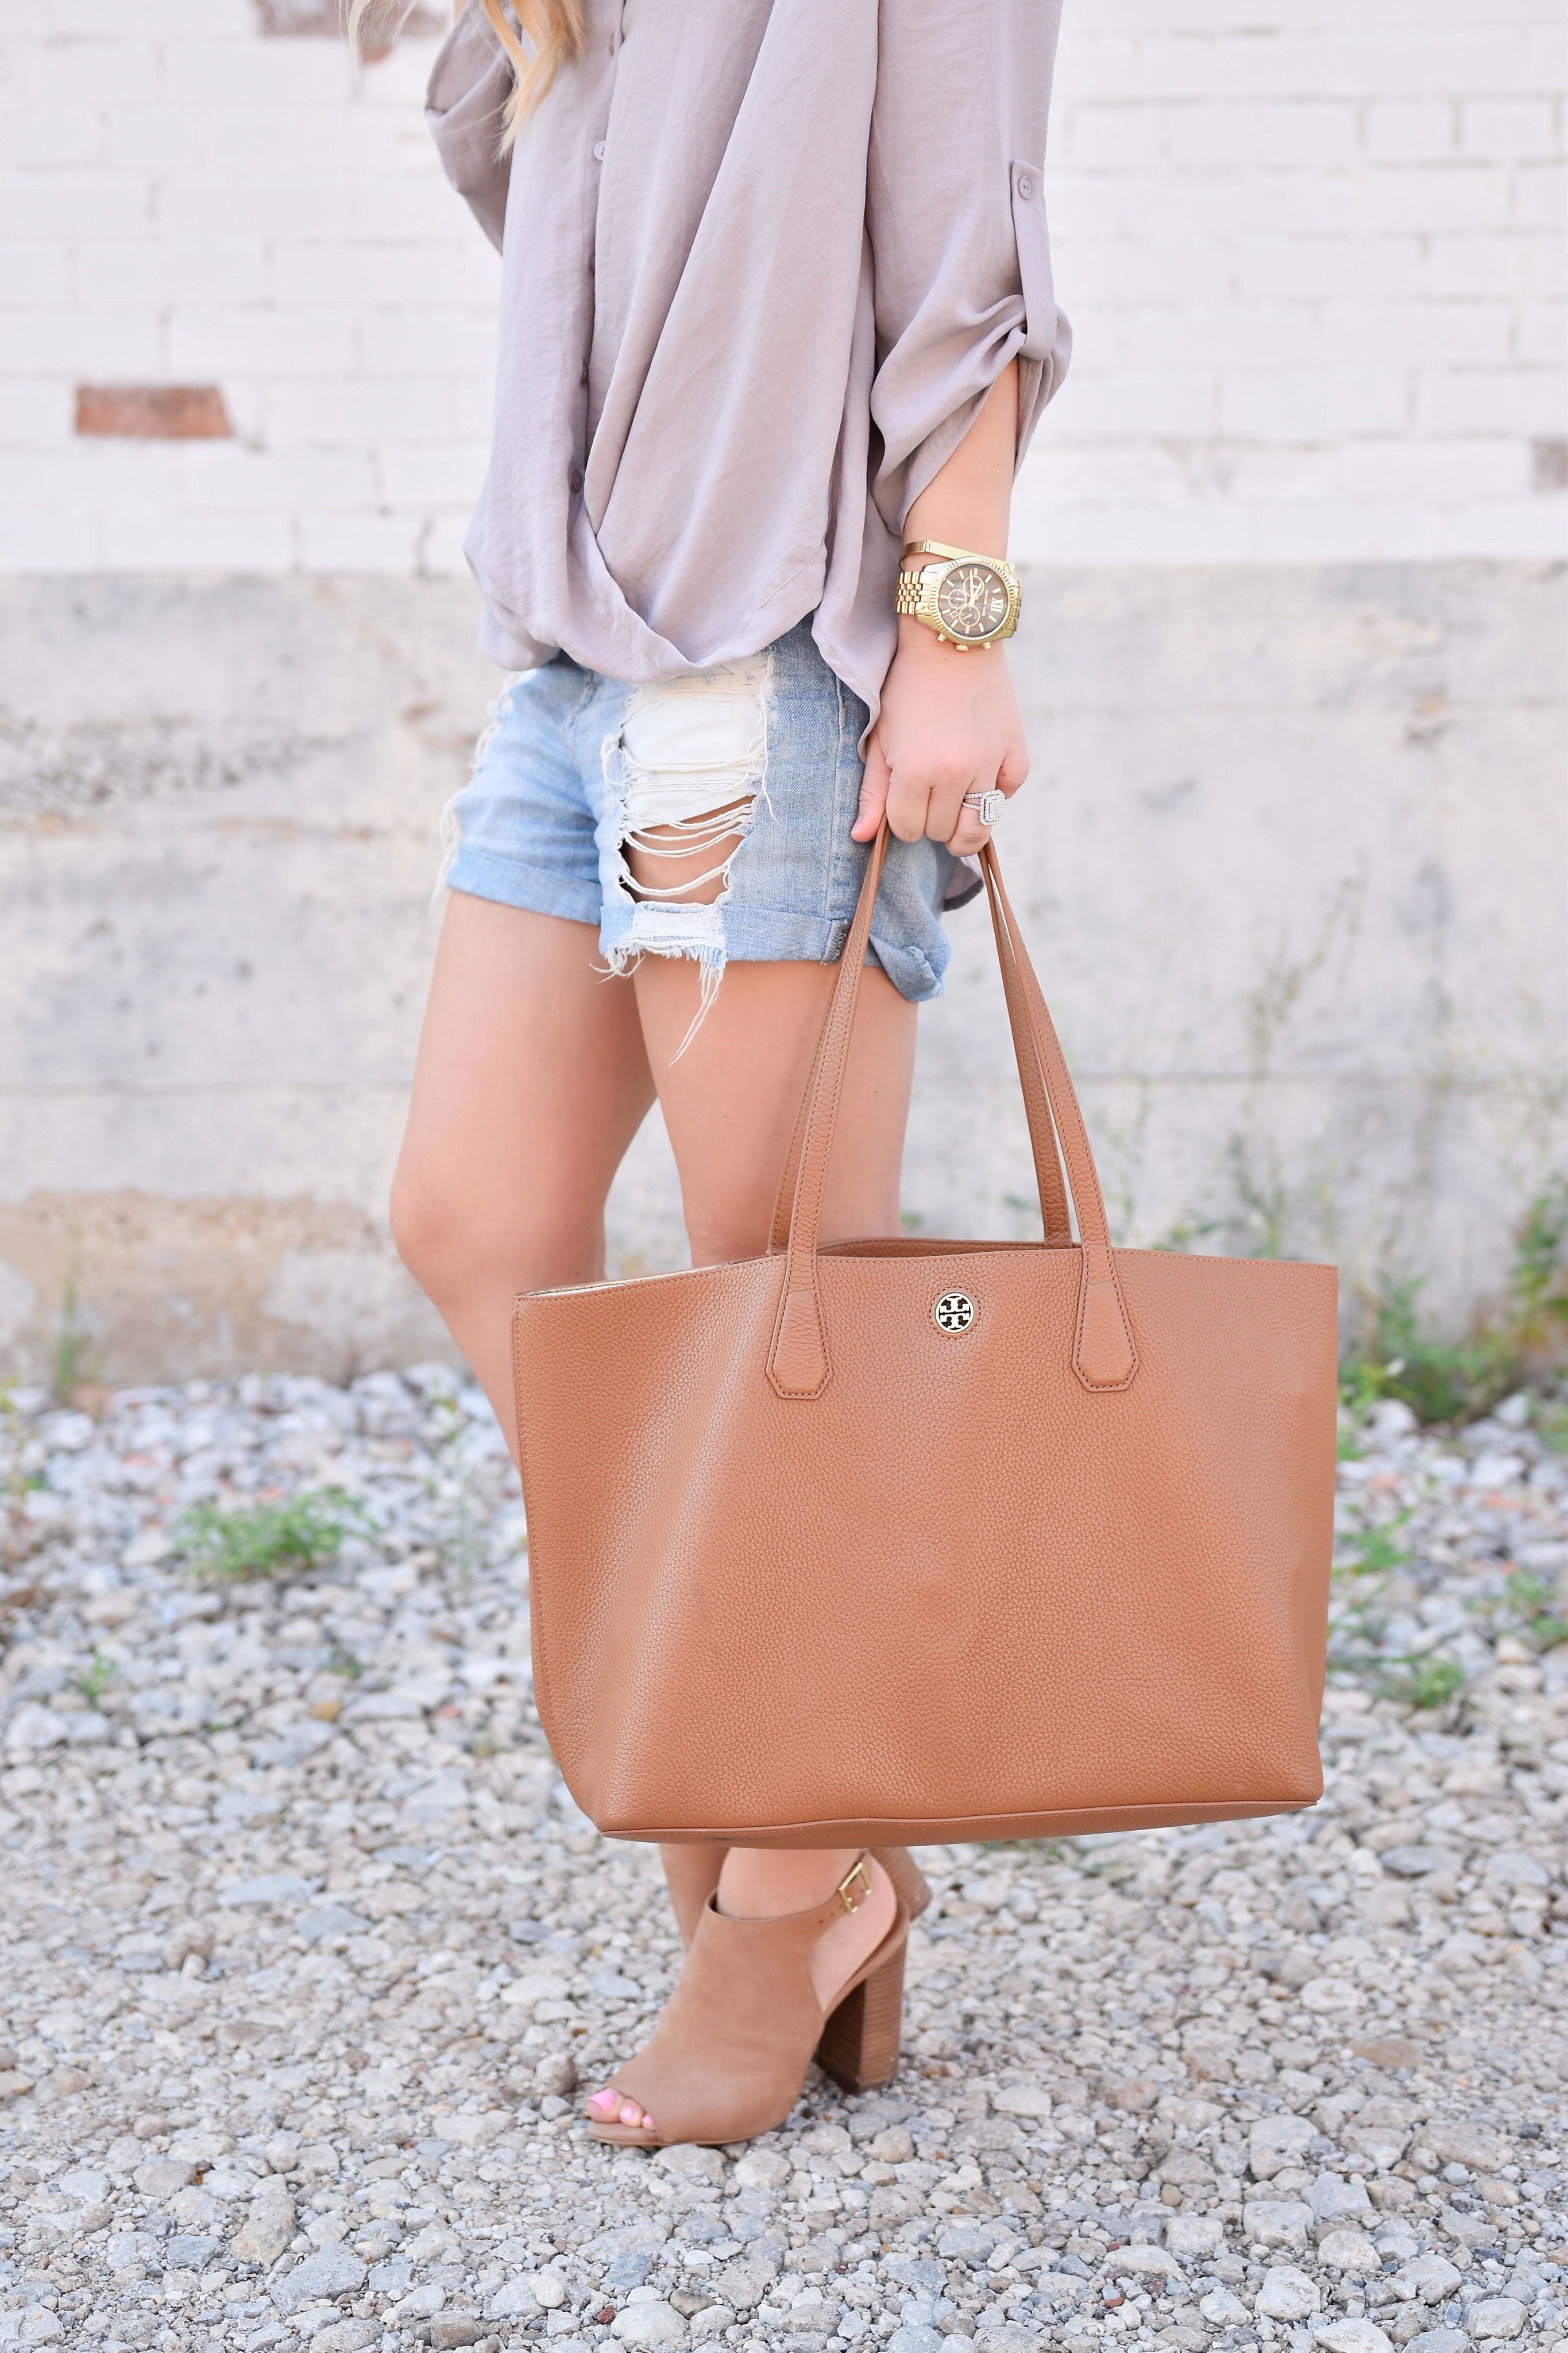 Denim Shorts, Lush Top, Wrap front top, Nordstrom Blouse, Tory Burch Tote, Steve Madden Mules, Steve Madden Heels, Nordstrom Shorts, Nordstrom Top, Nordstrom Tory Burch